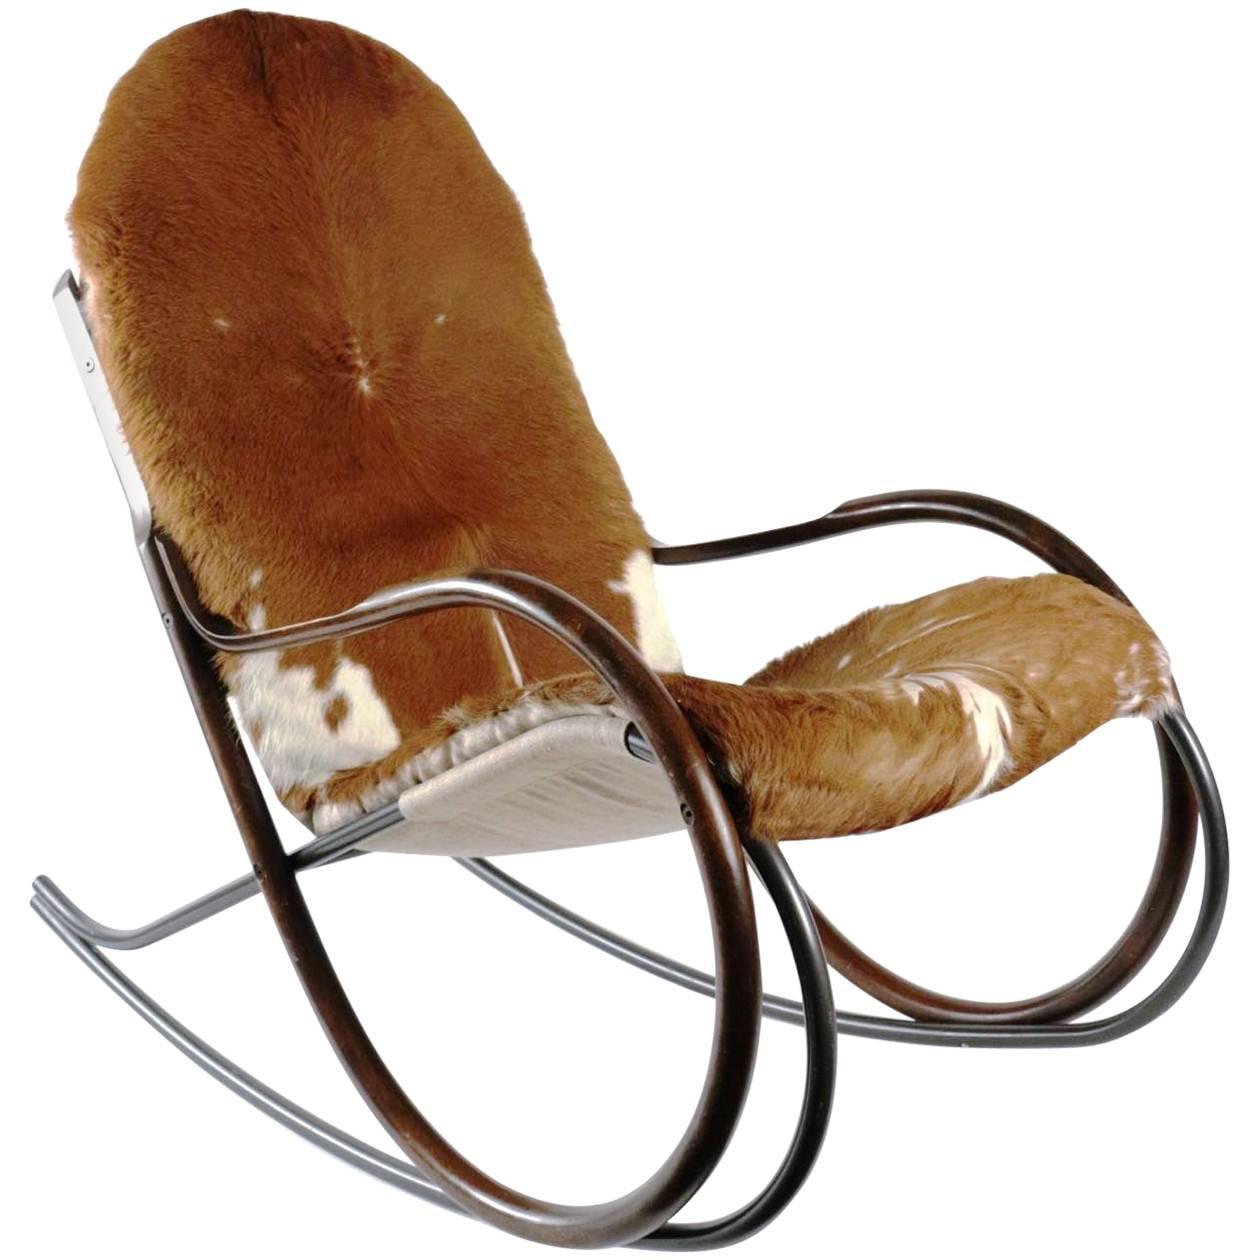 Rare and Original Nonna Rocking Chair, Paul Tuttle for Strassle, 1972 Cow Skin